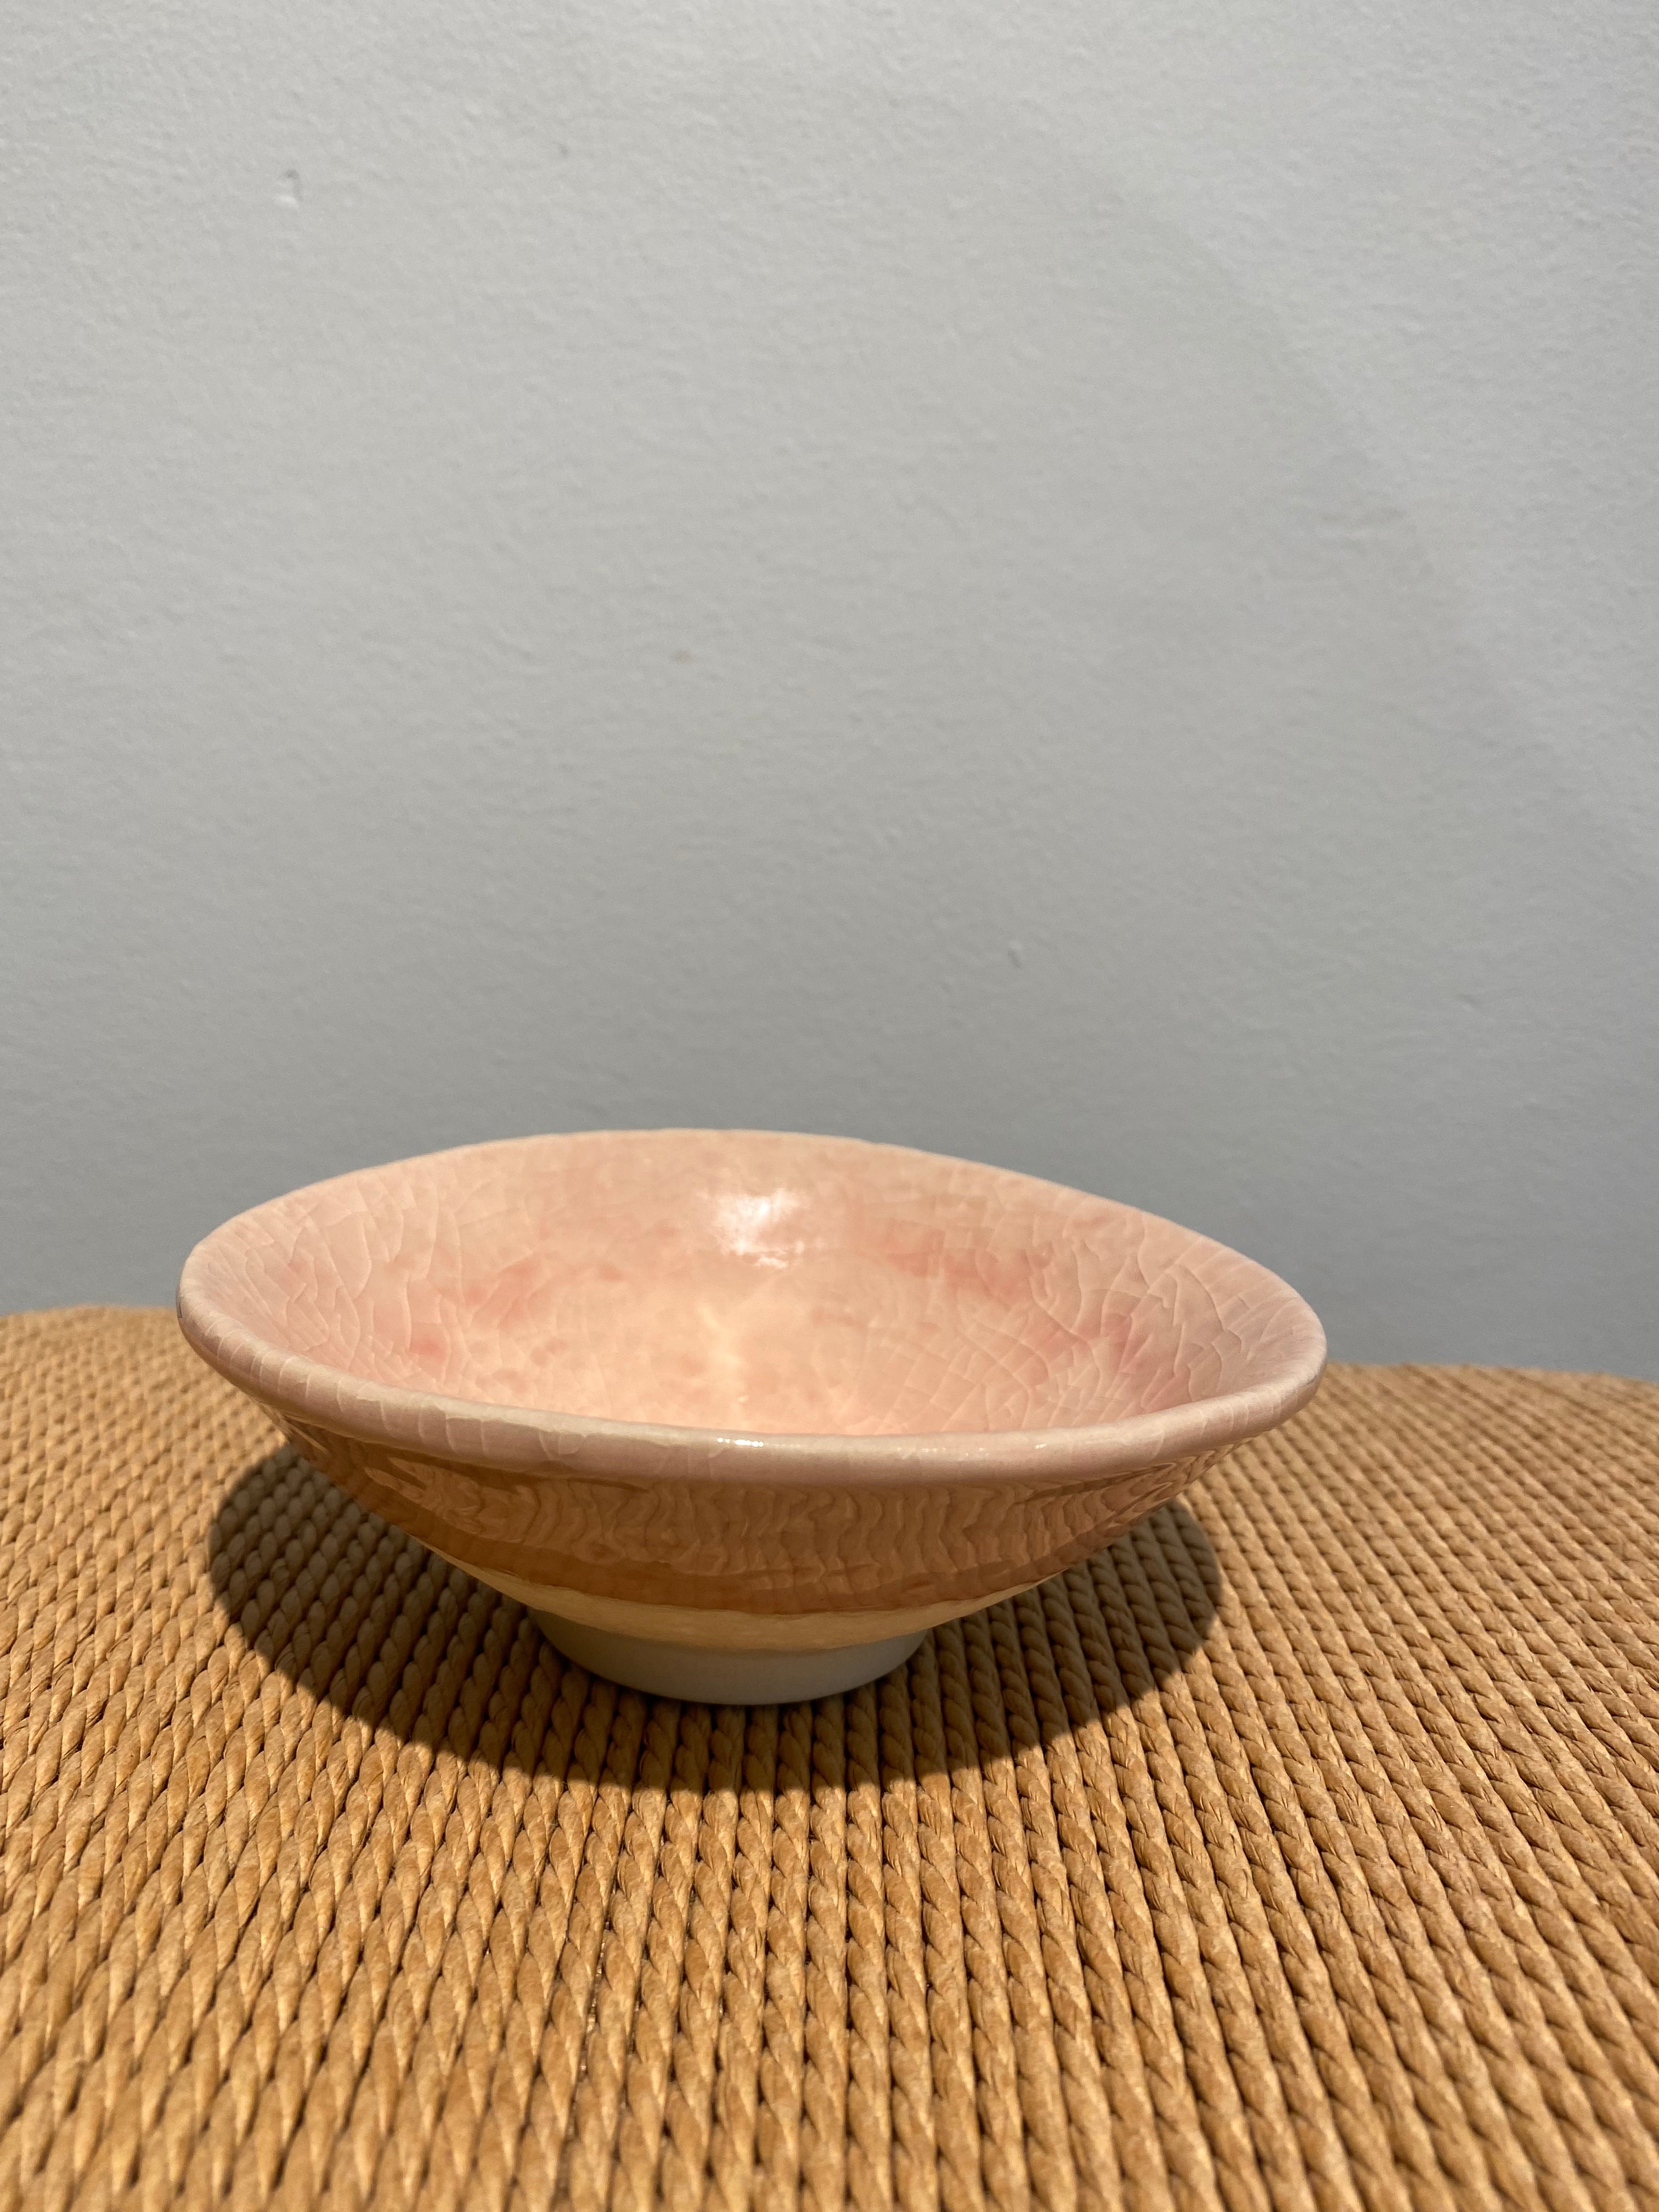 Bowl with pink glaze and cracked texture